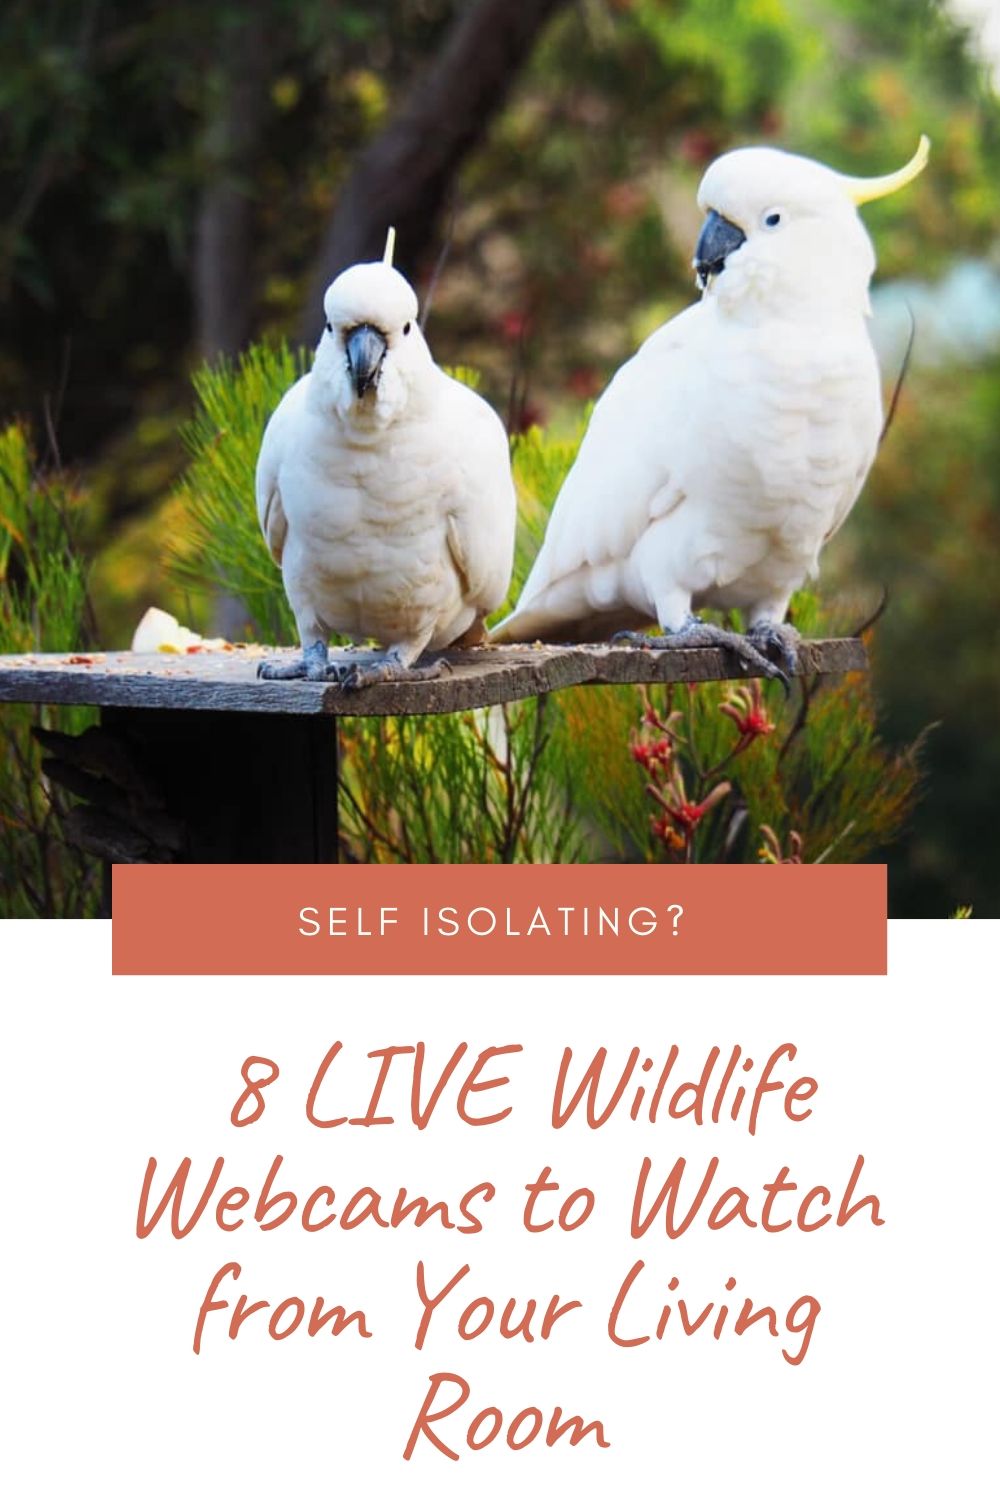 8 LIVE Wildlife Webcams to Watch from Your Living Room